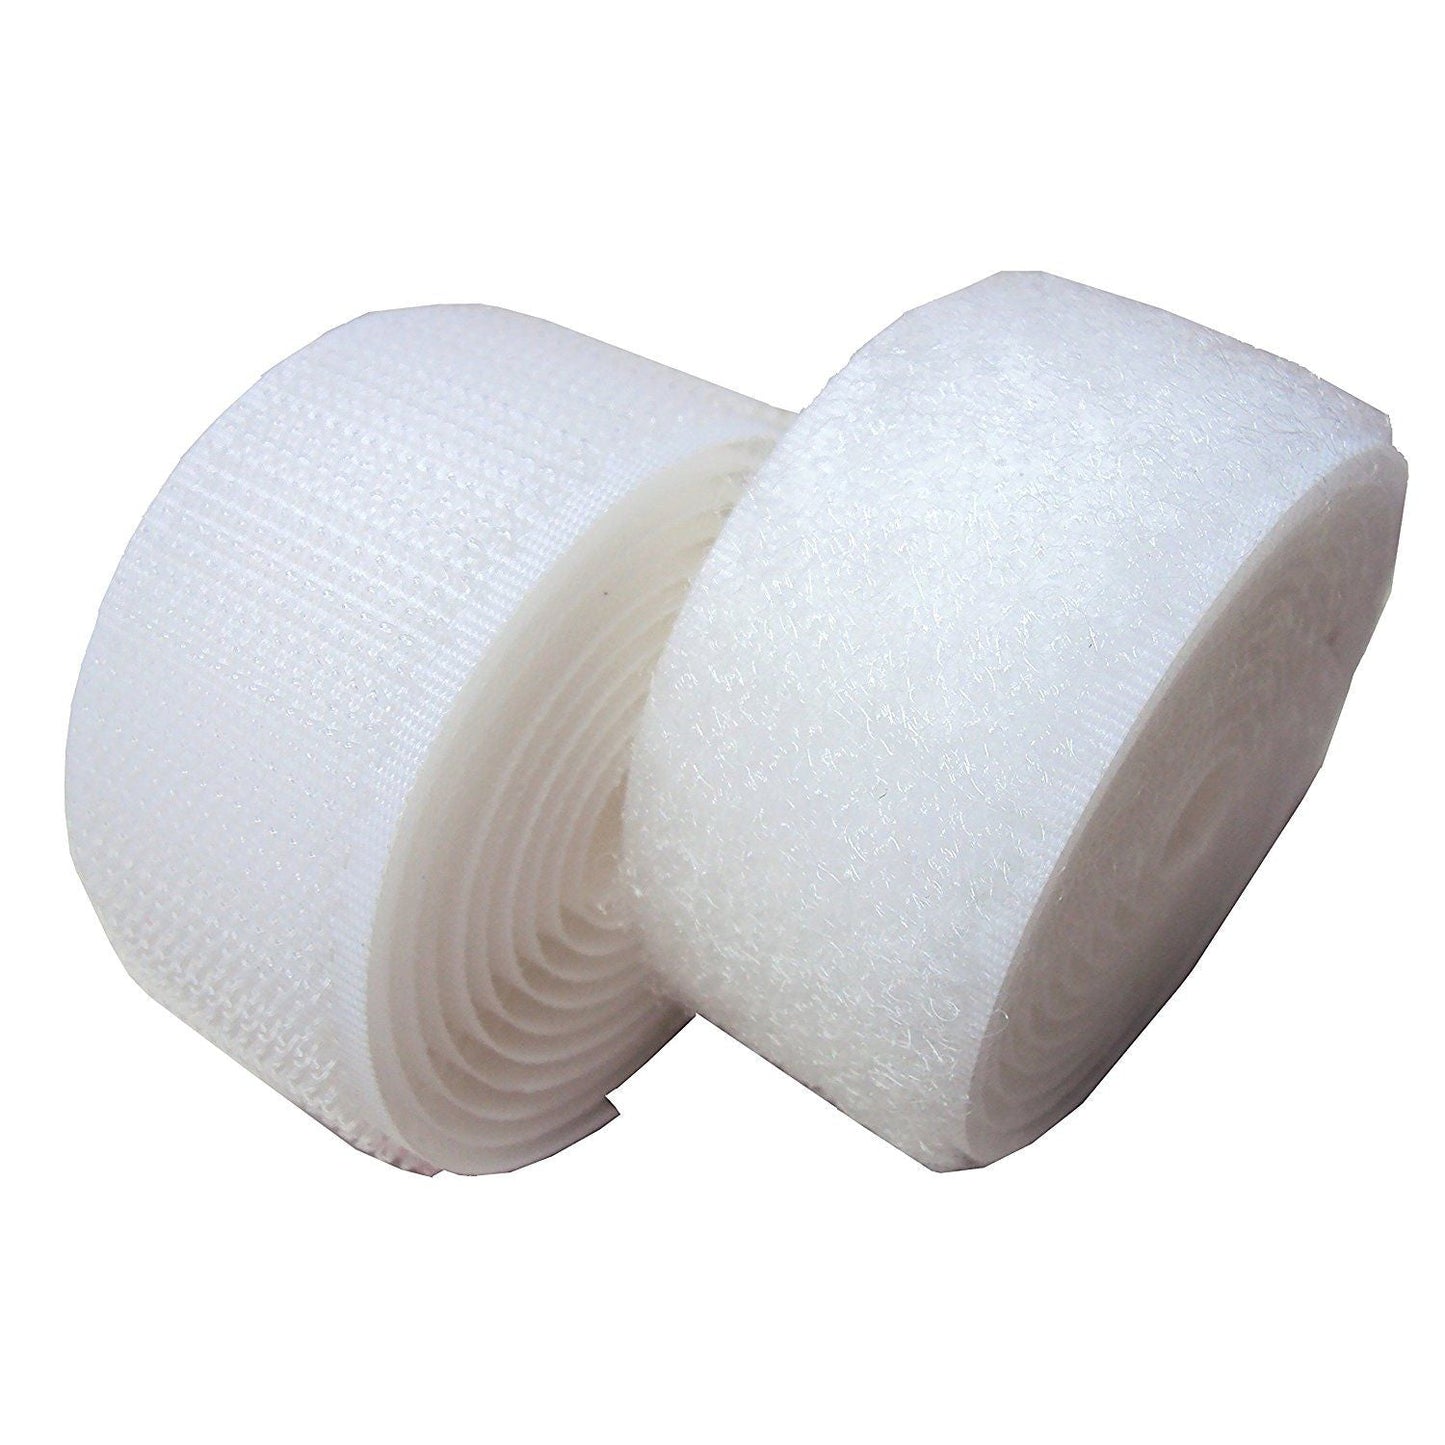 VELCRO® Tape Hook and Loop - Sew On White - 20mm